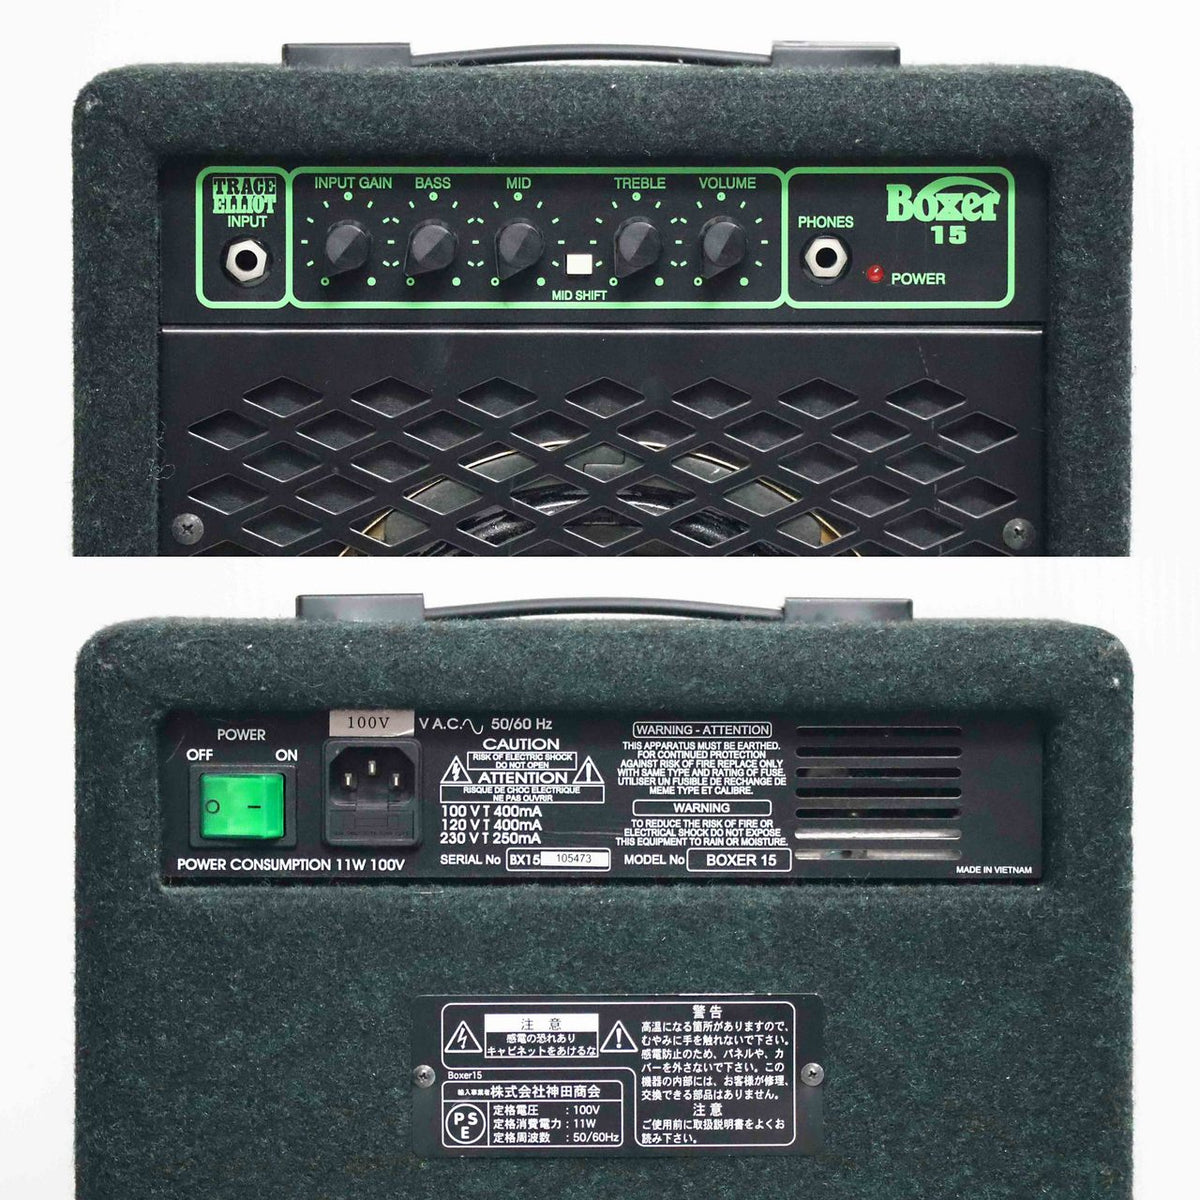 Trace Elliot Boxer 15 Bass Amp (Sealed in Box)